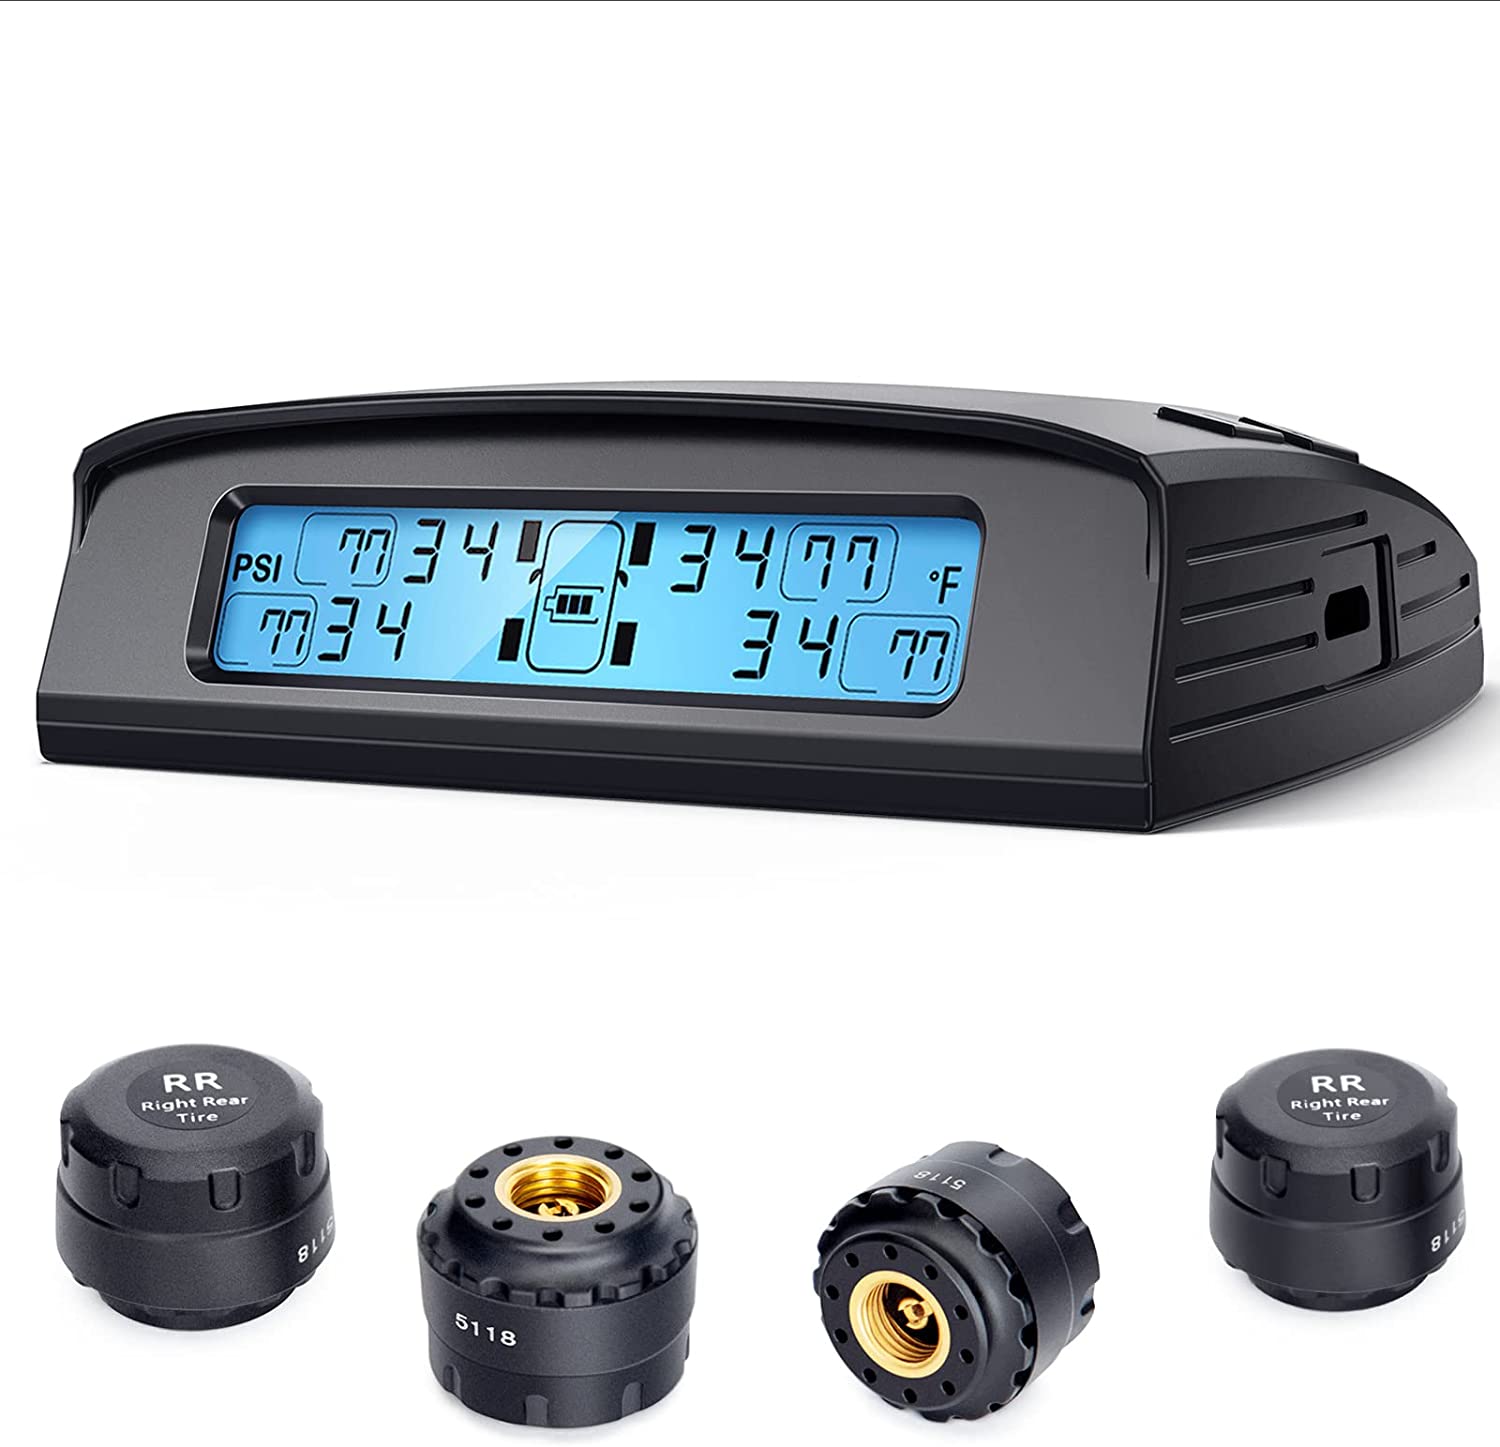 Tymate Tire Pressure Monitoring System with Solar Charge, M7-3 pro TPMS with 5 Alarm Modes, Auto Backlight ＆ Smart LCD Display, Auto Sleep Mode, with 4 External Tpms Sensor (0-87 PSI)